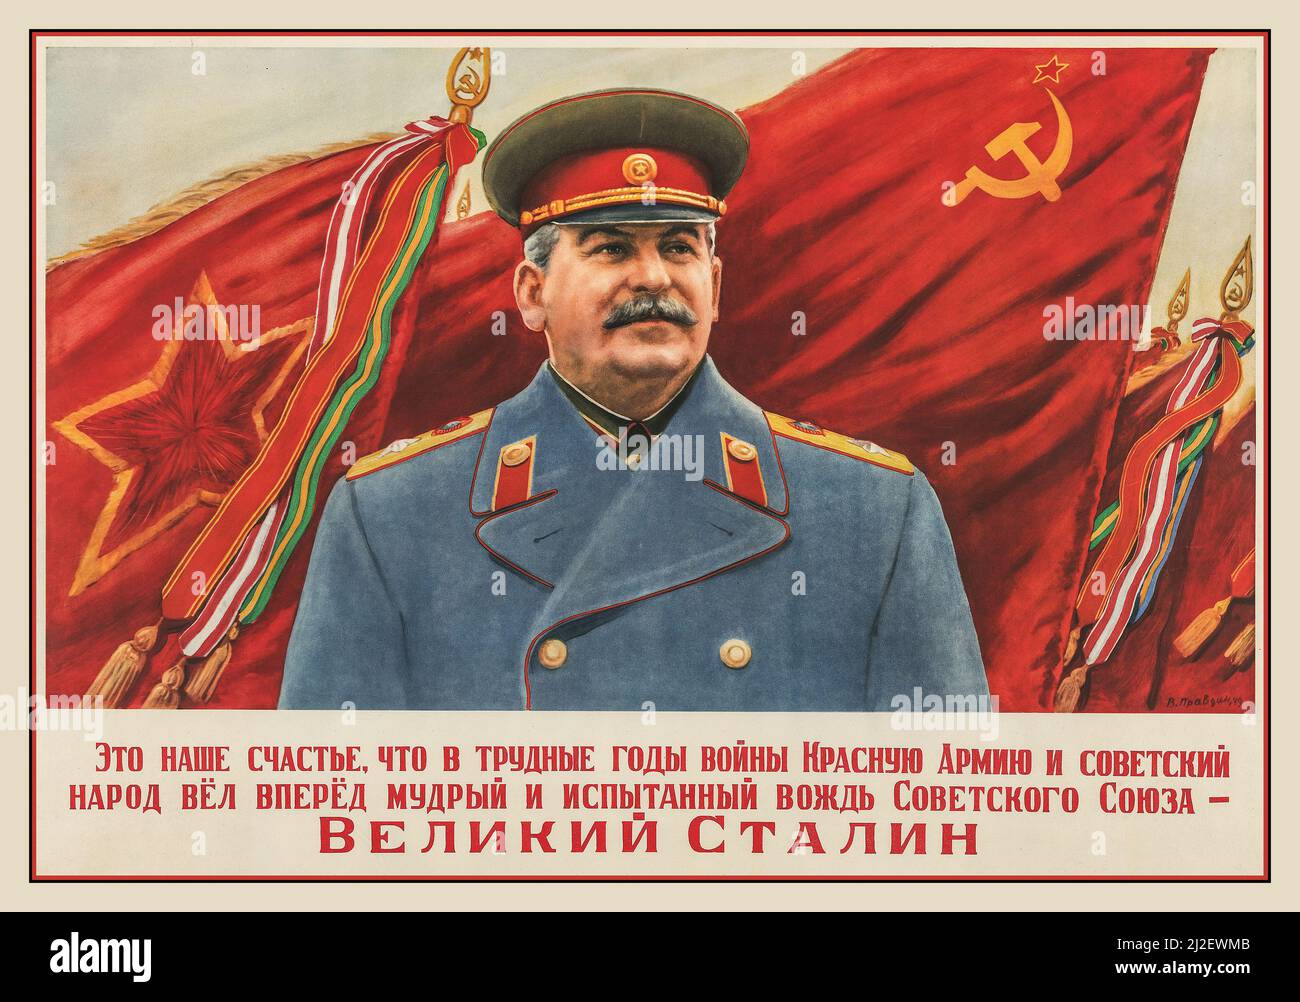 THE GREAT STALIN WW2 Russian Propaganda Poster STALIN 'It is our happiness that in the difficult years of the war the Red Army and the Soviet people were led forward by the wise and experienced leader of the Soviet Union - The Great Stalin' World War II. between 1940 and 1945 Stock Photo